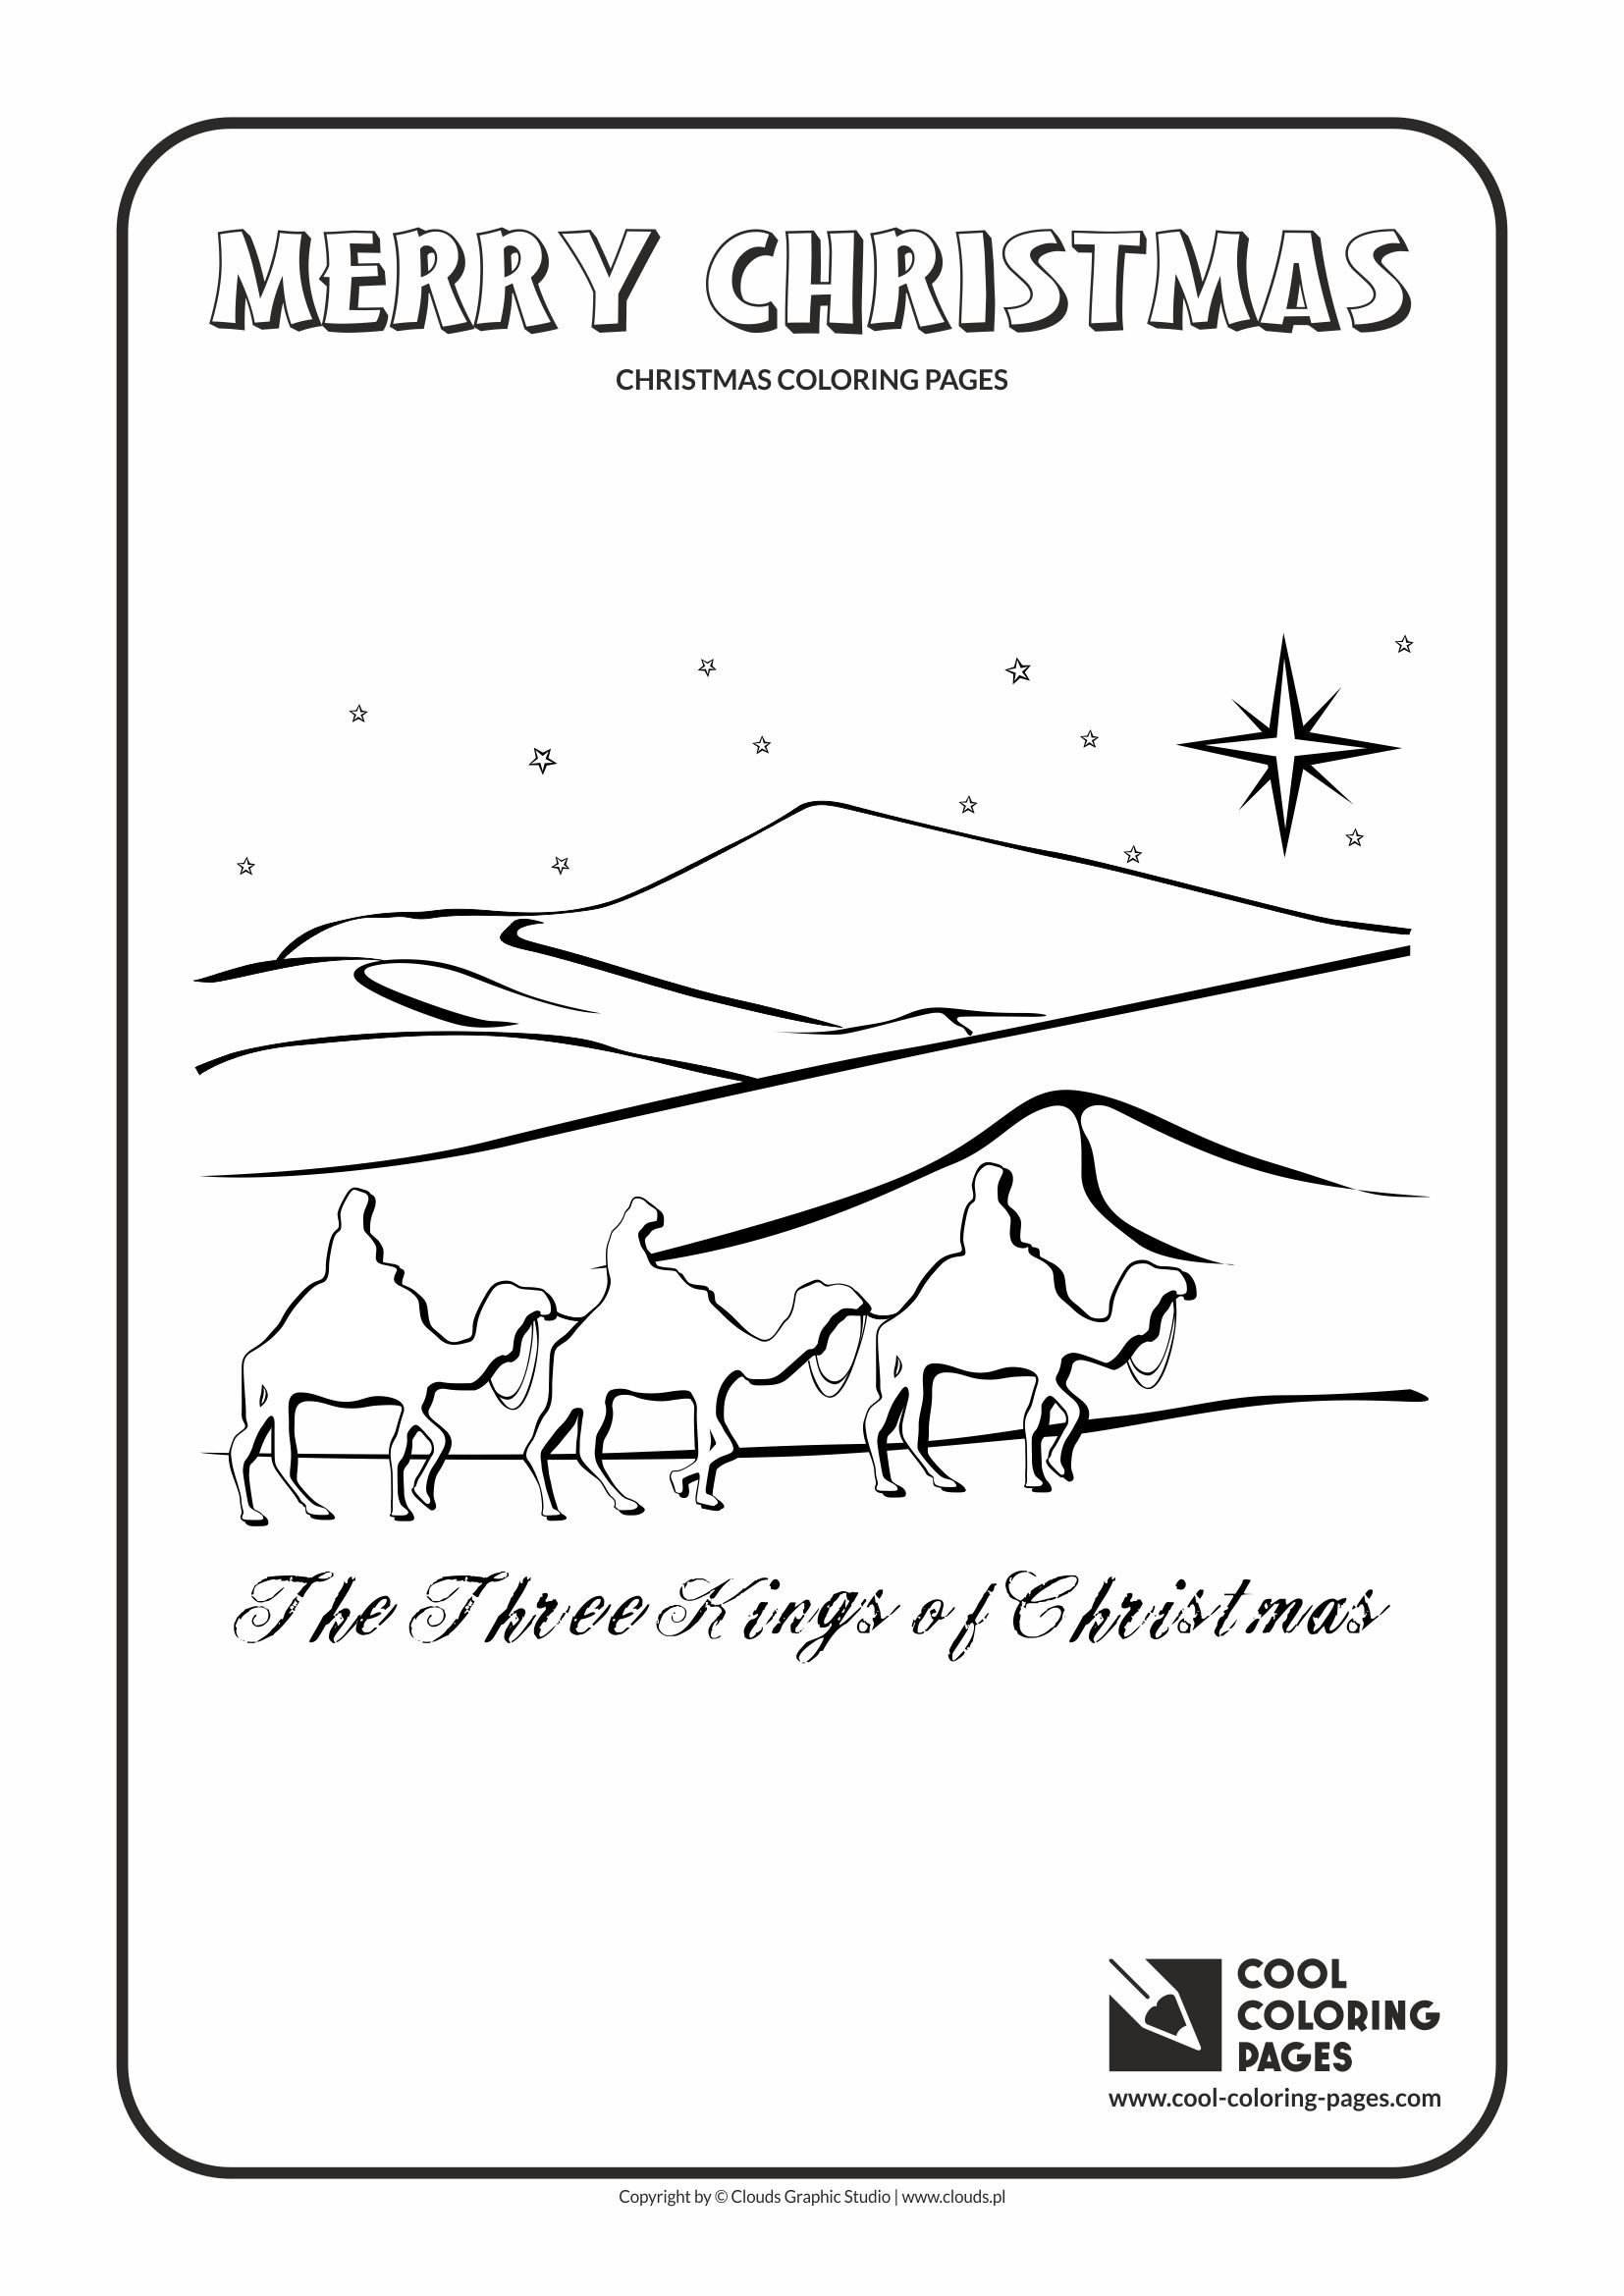 Cool Coloring Pages - Holidays / Three Kings of Christmas / Coloring page with Three Kings of Christmas